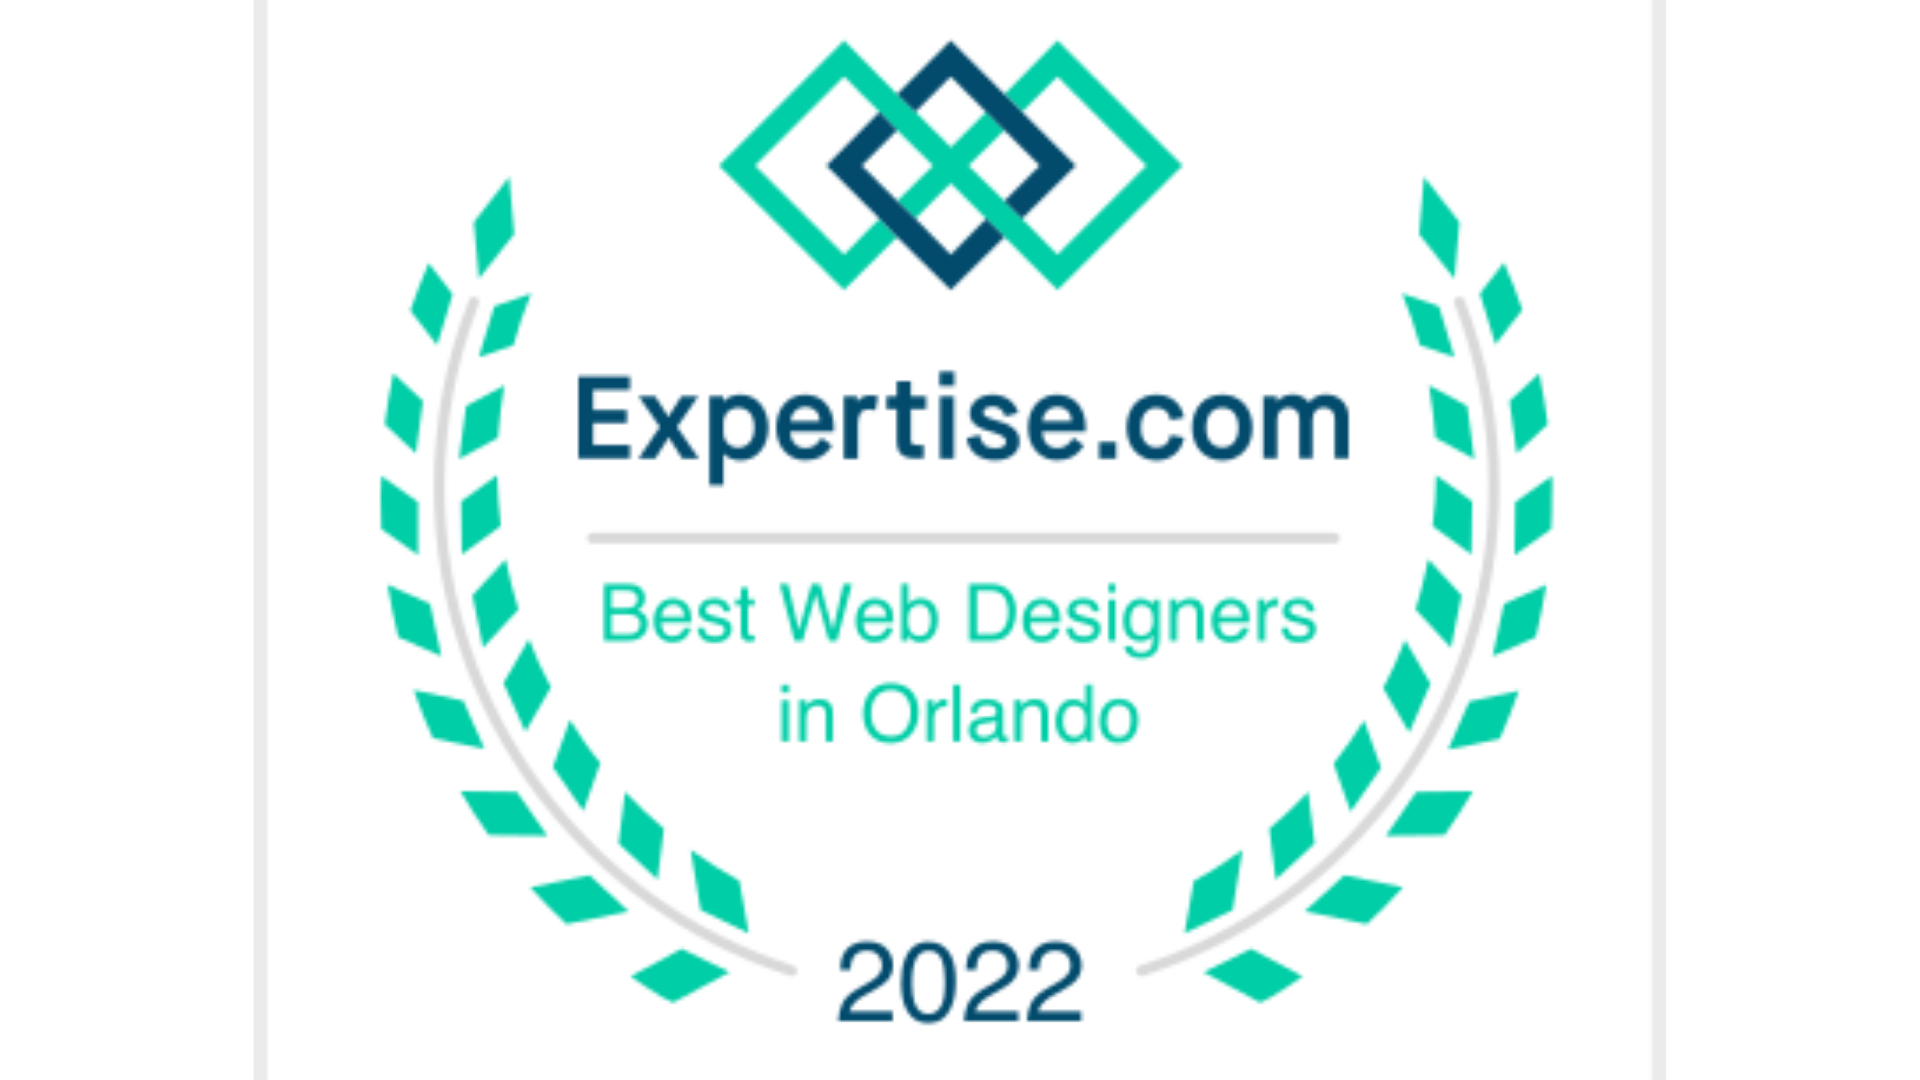 Best Web Designers in Orlando, Florida for 2022 award seal from Expertise.com. Awarded to Growth Marketing Firm. 